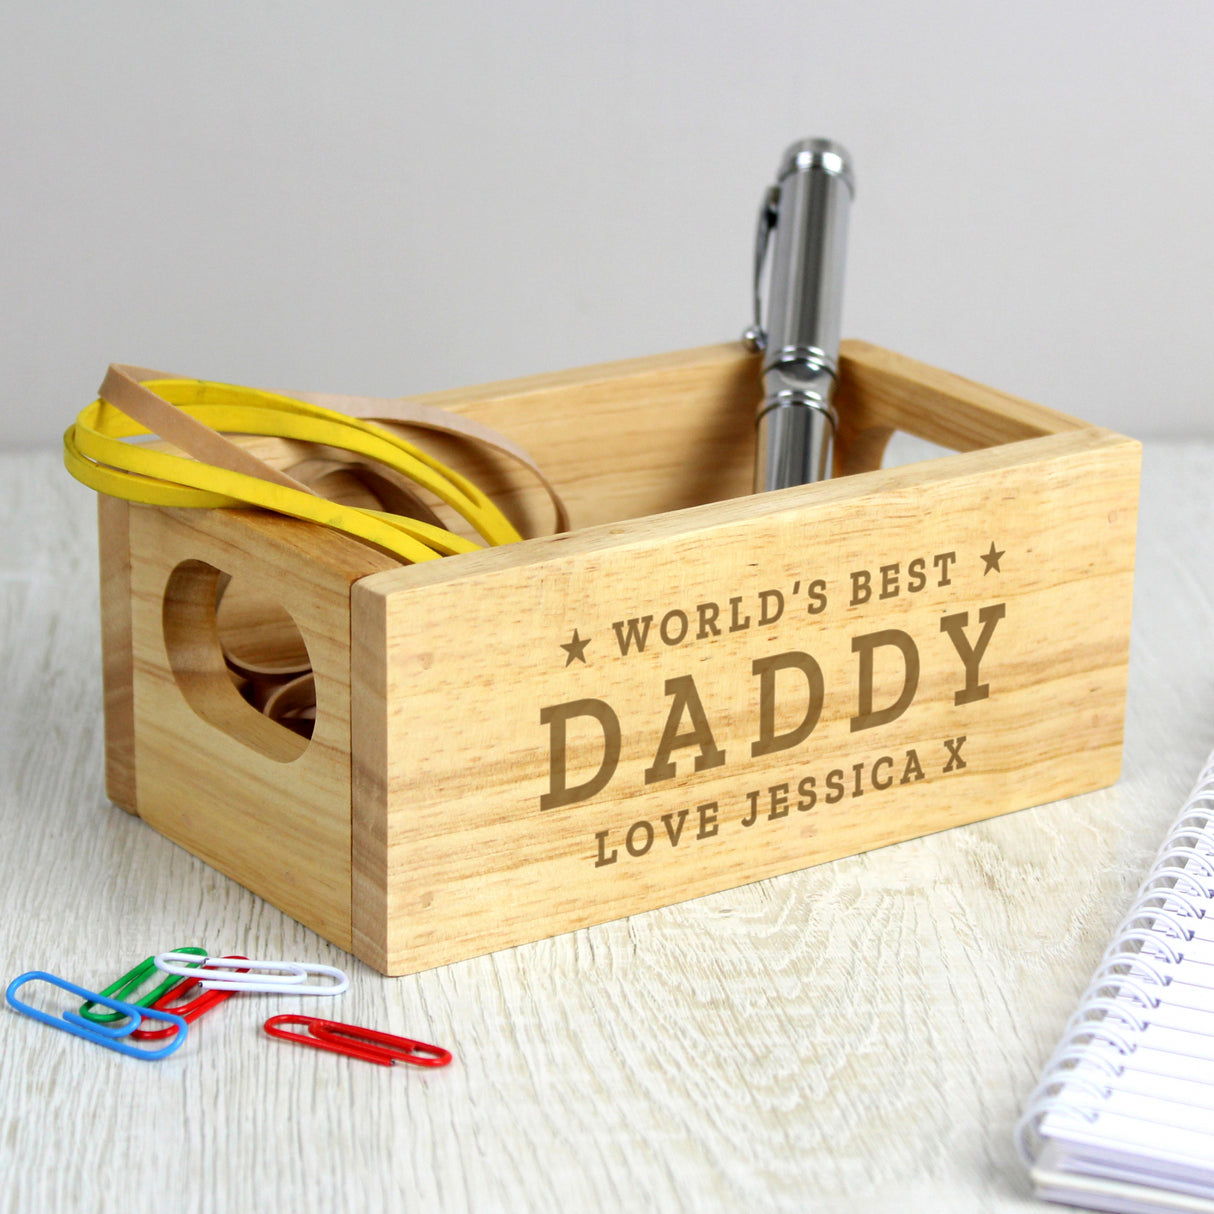 Worlds Best Mini Wooden Crate - Gift Moments